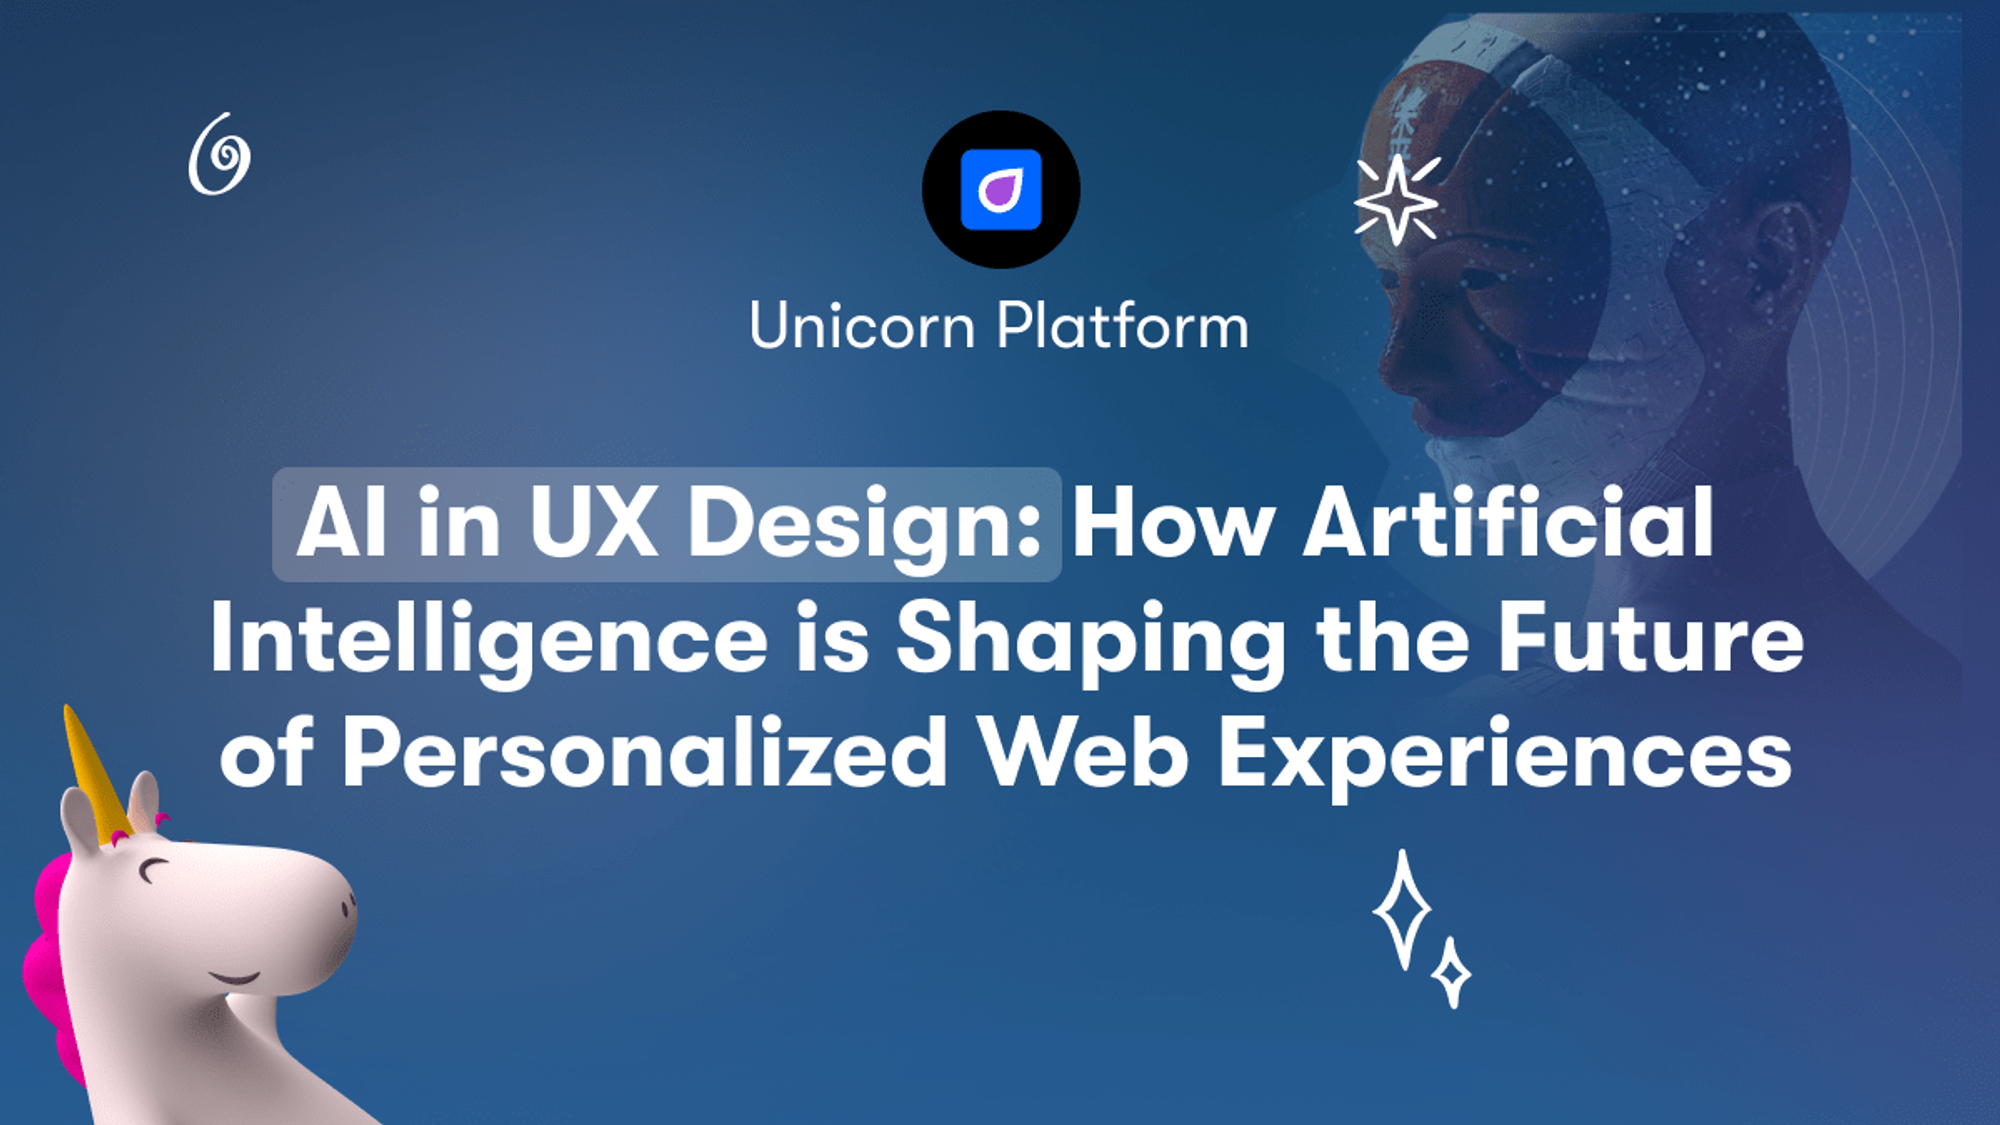 AI in UX Design: How Artificial Intelligence is Shaping the Future of Personalized Web Experiences